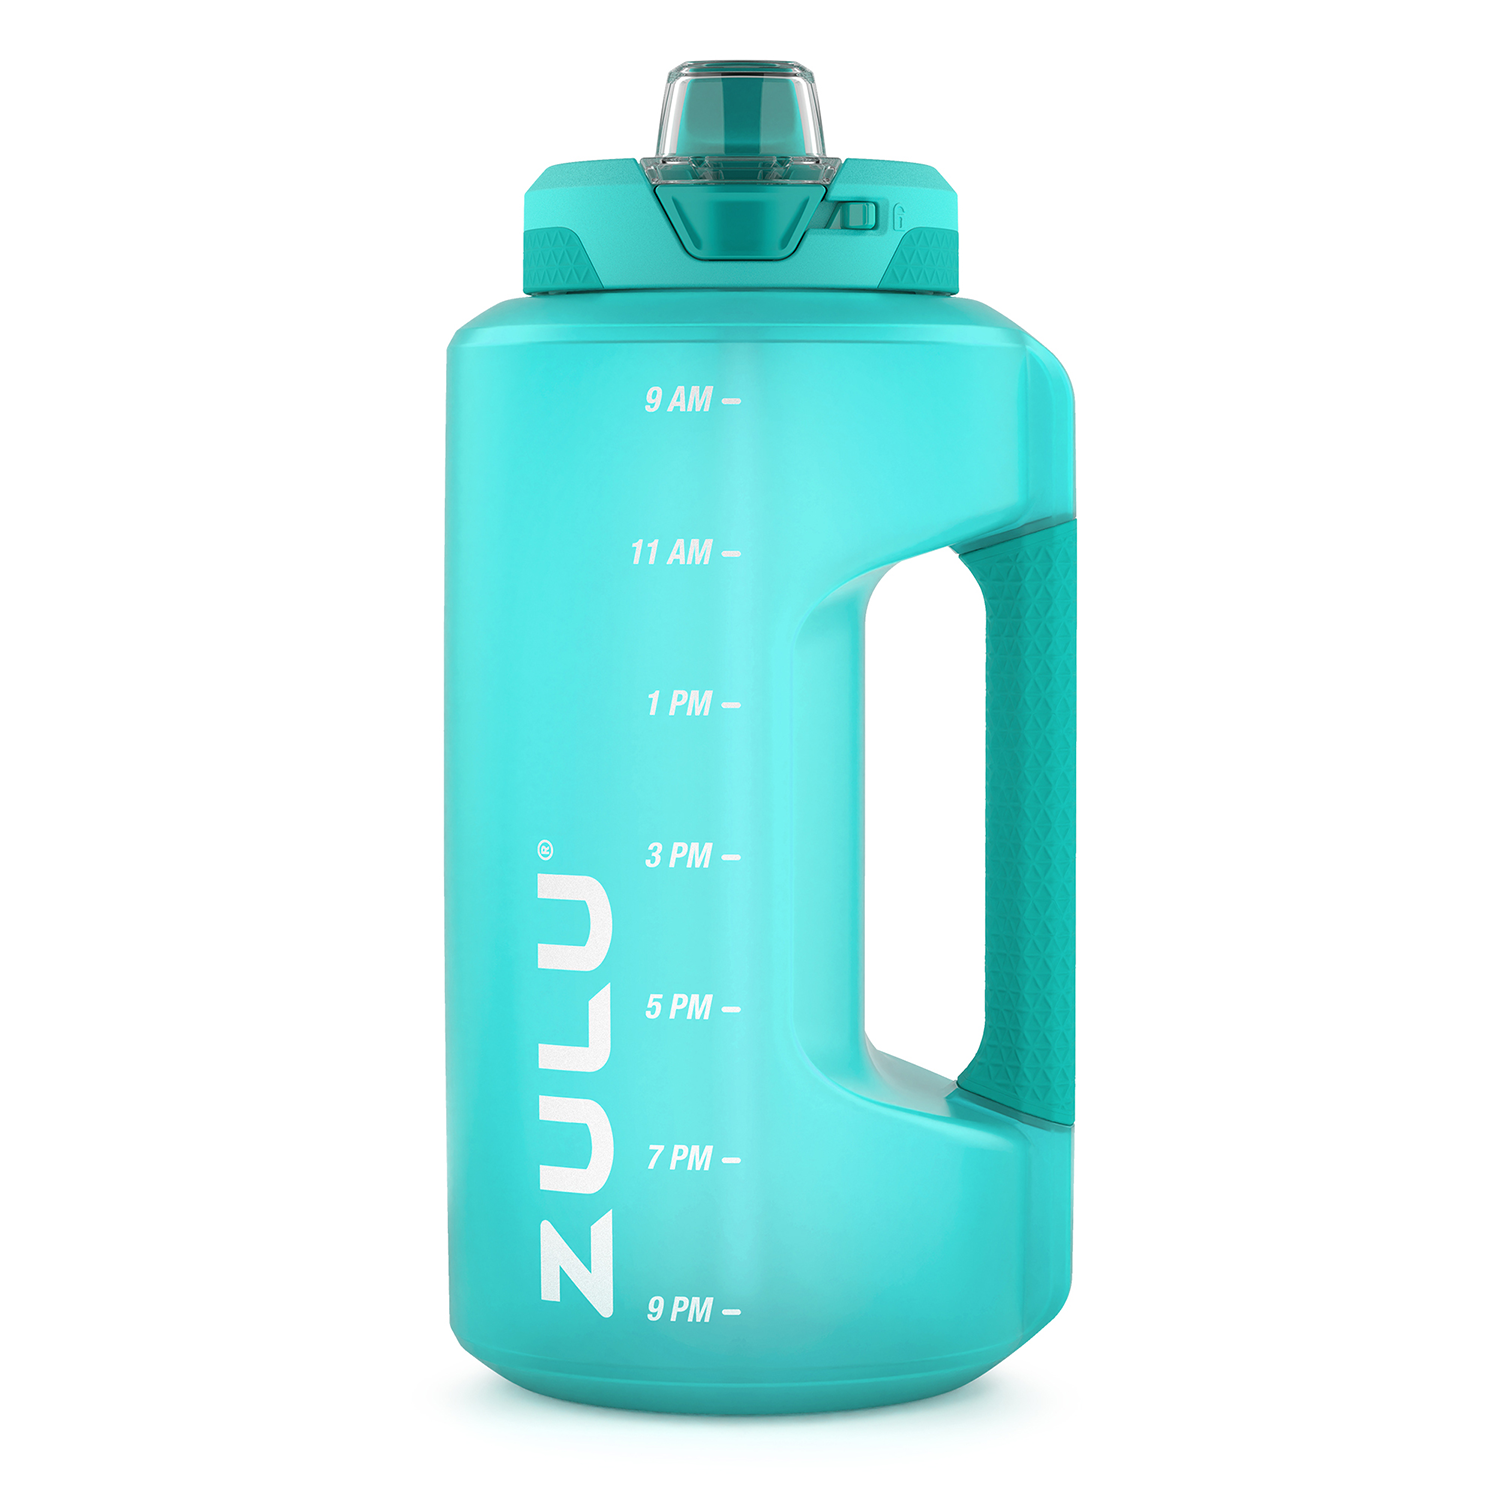 Zulu Goals Half Gallon Jug with Time Marker & Handle for All Day